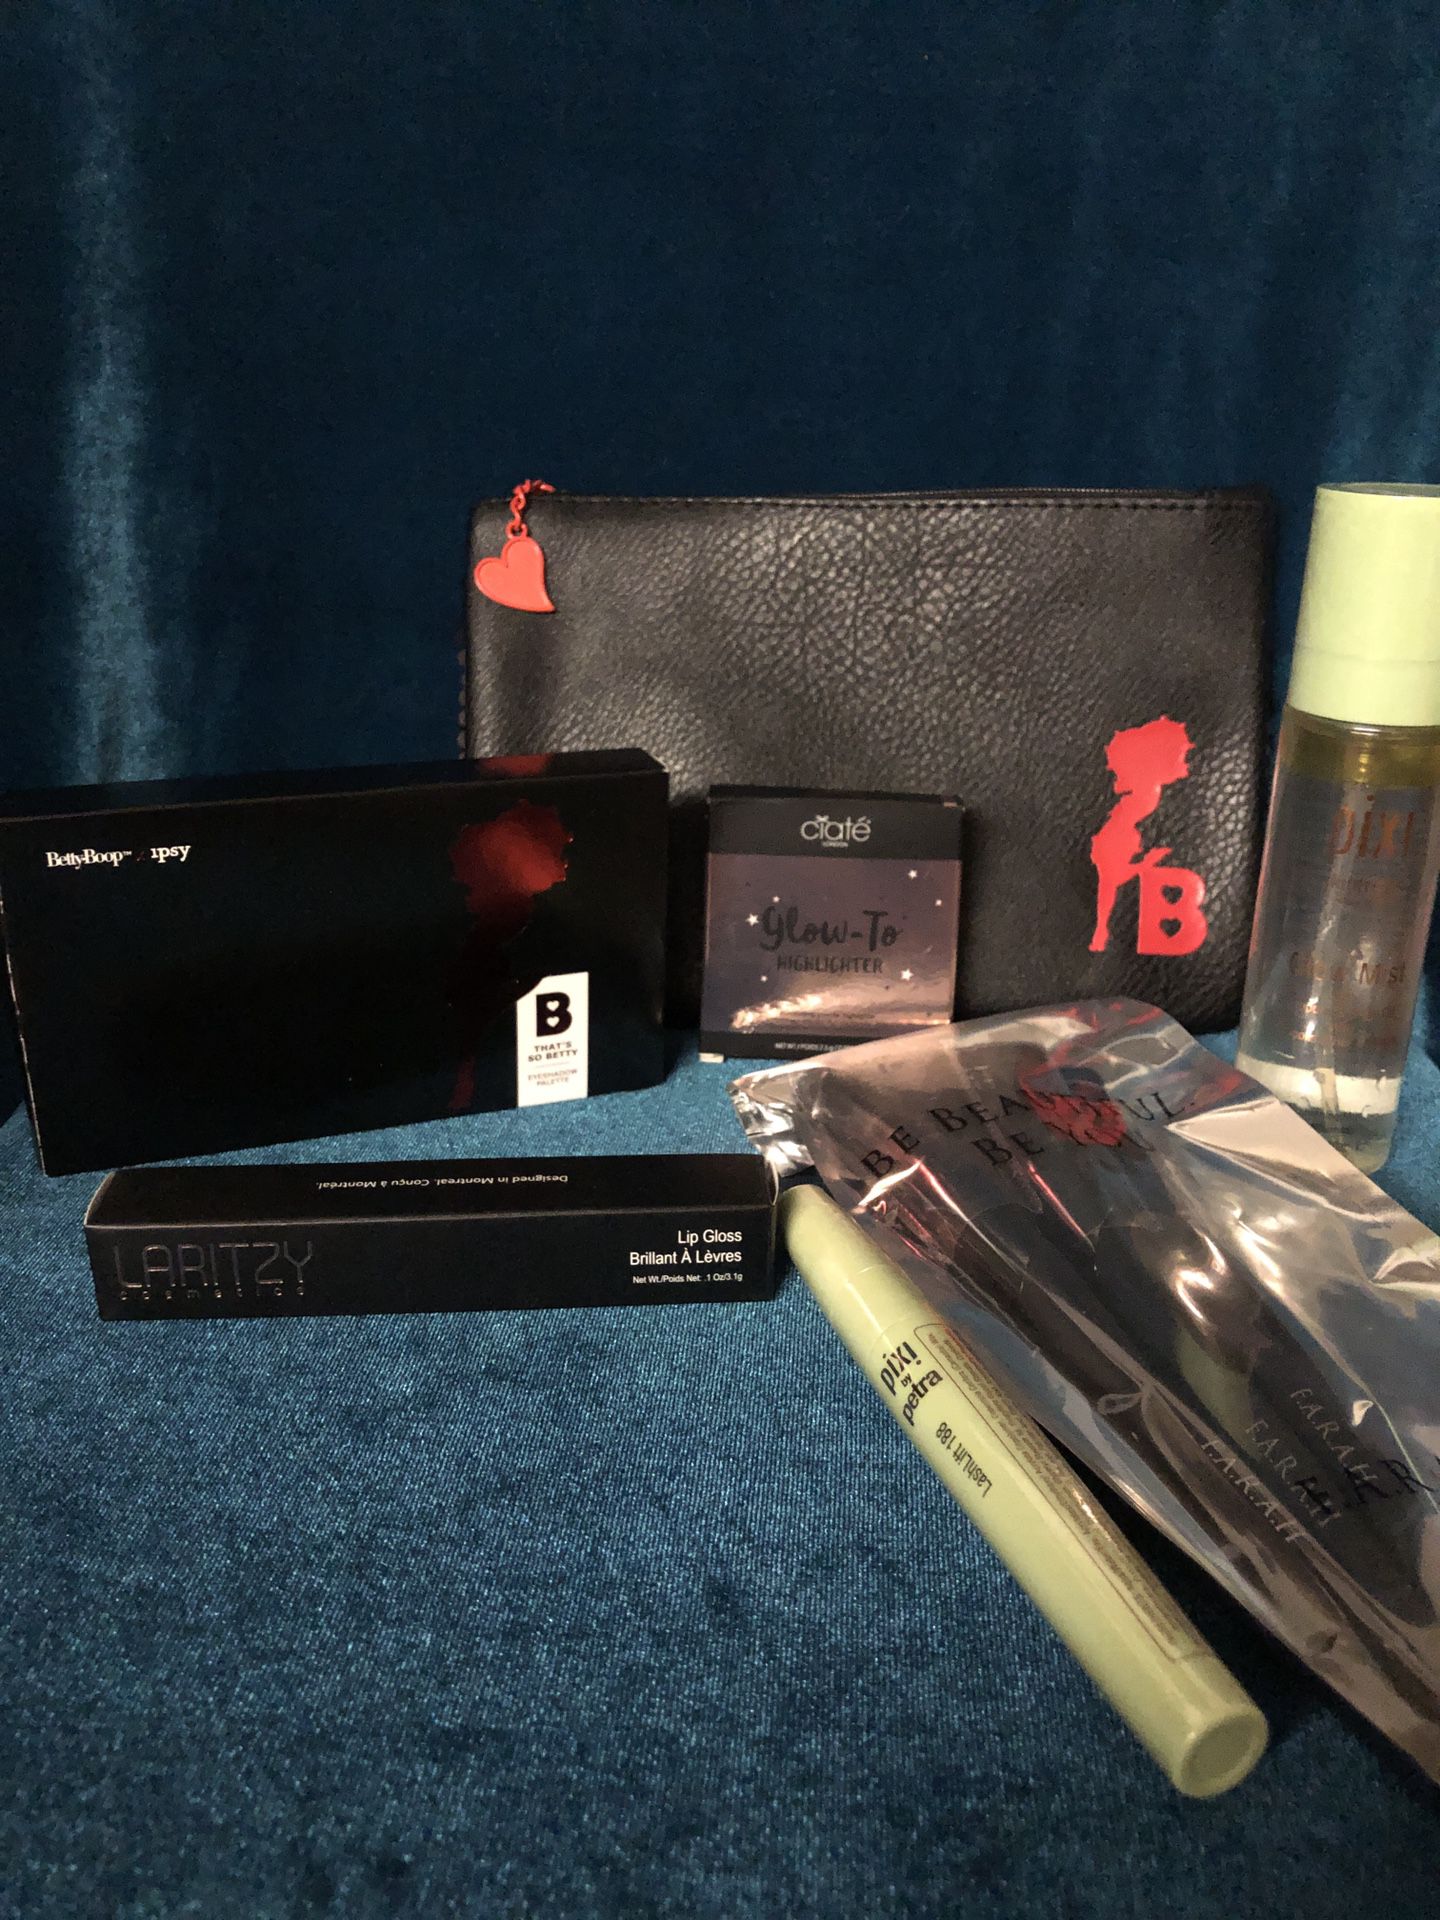 Ipsy x Betty Boop glam bag plus + products